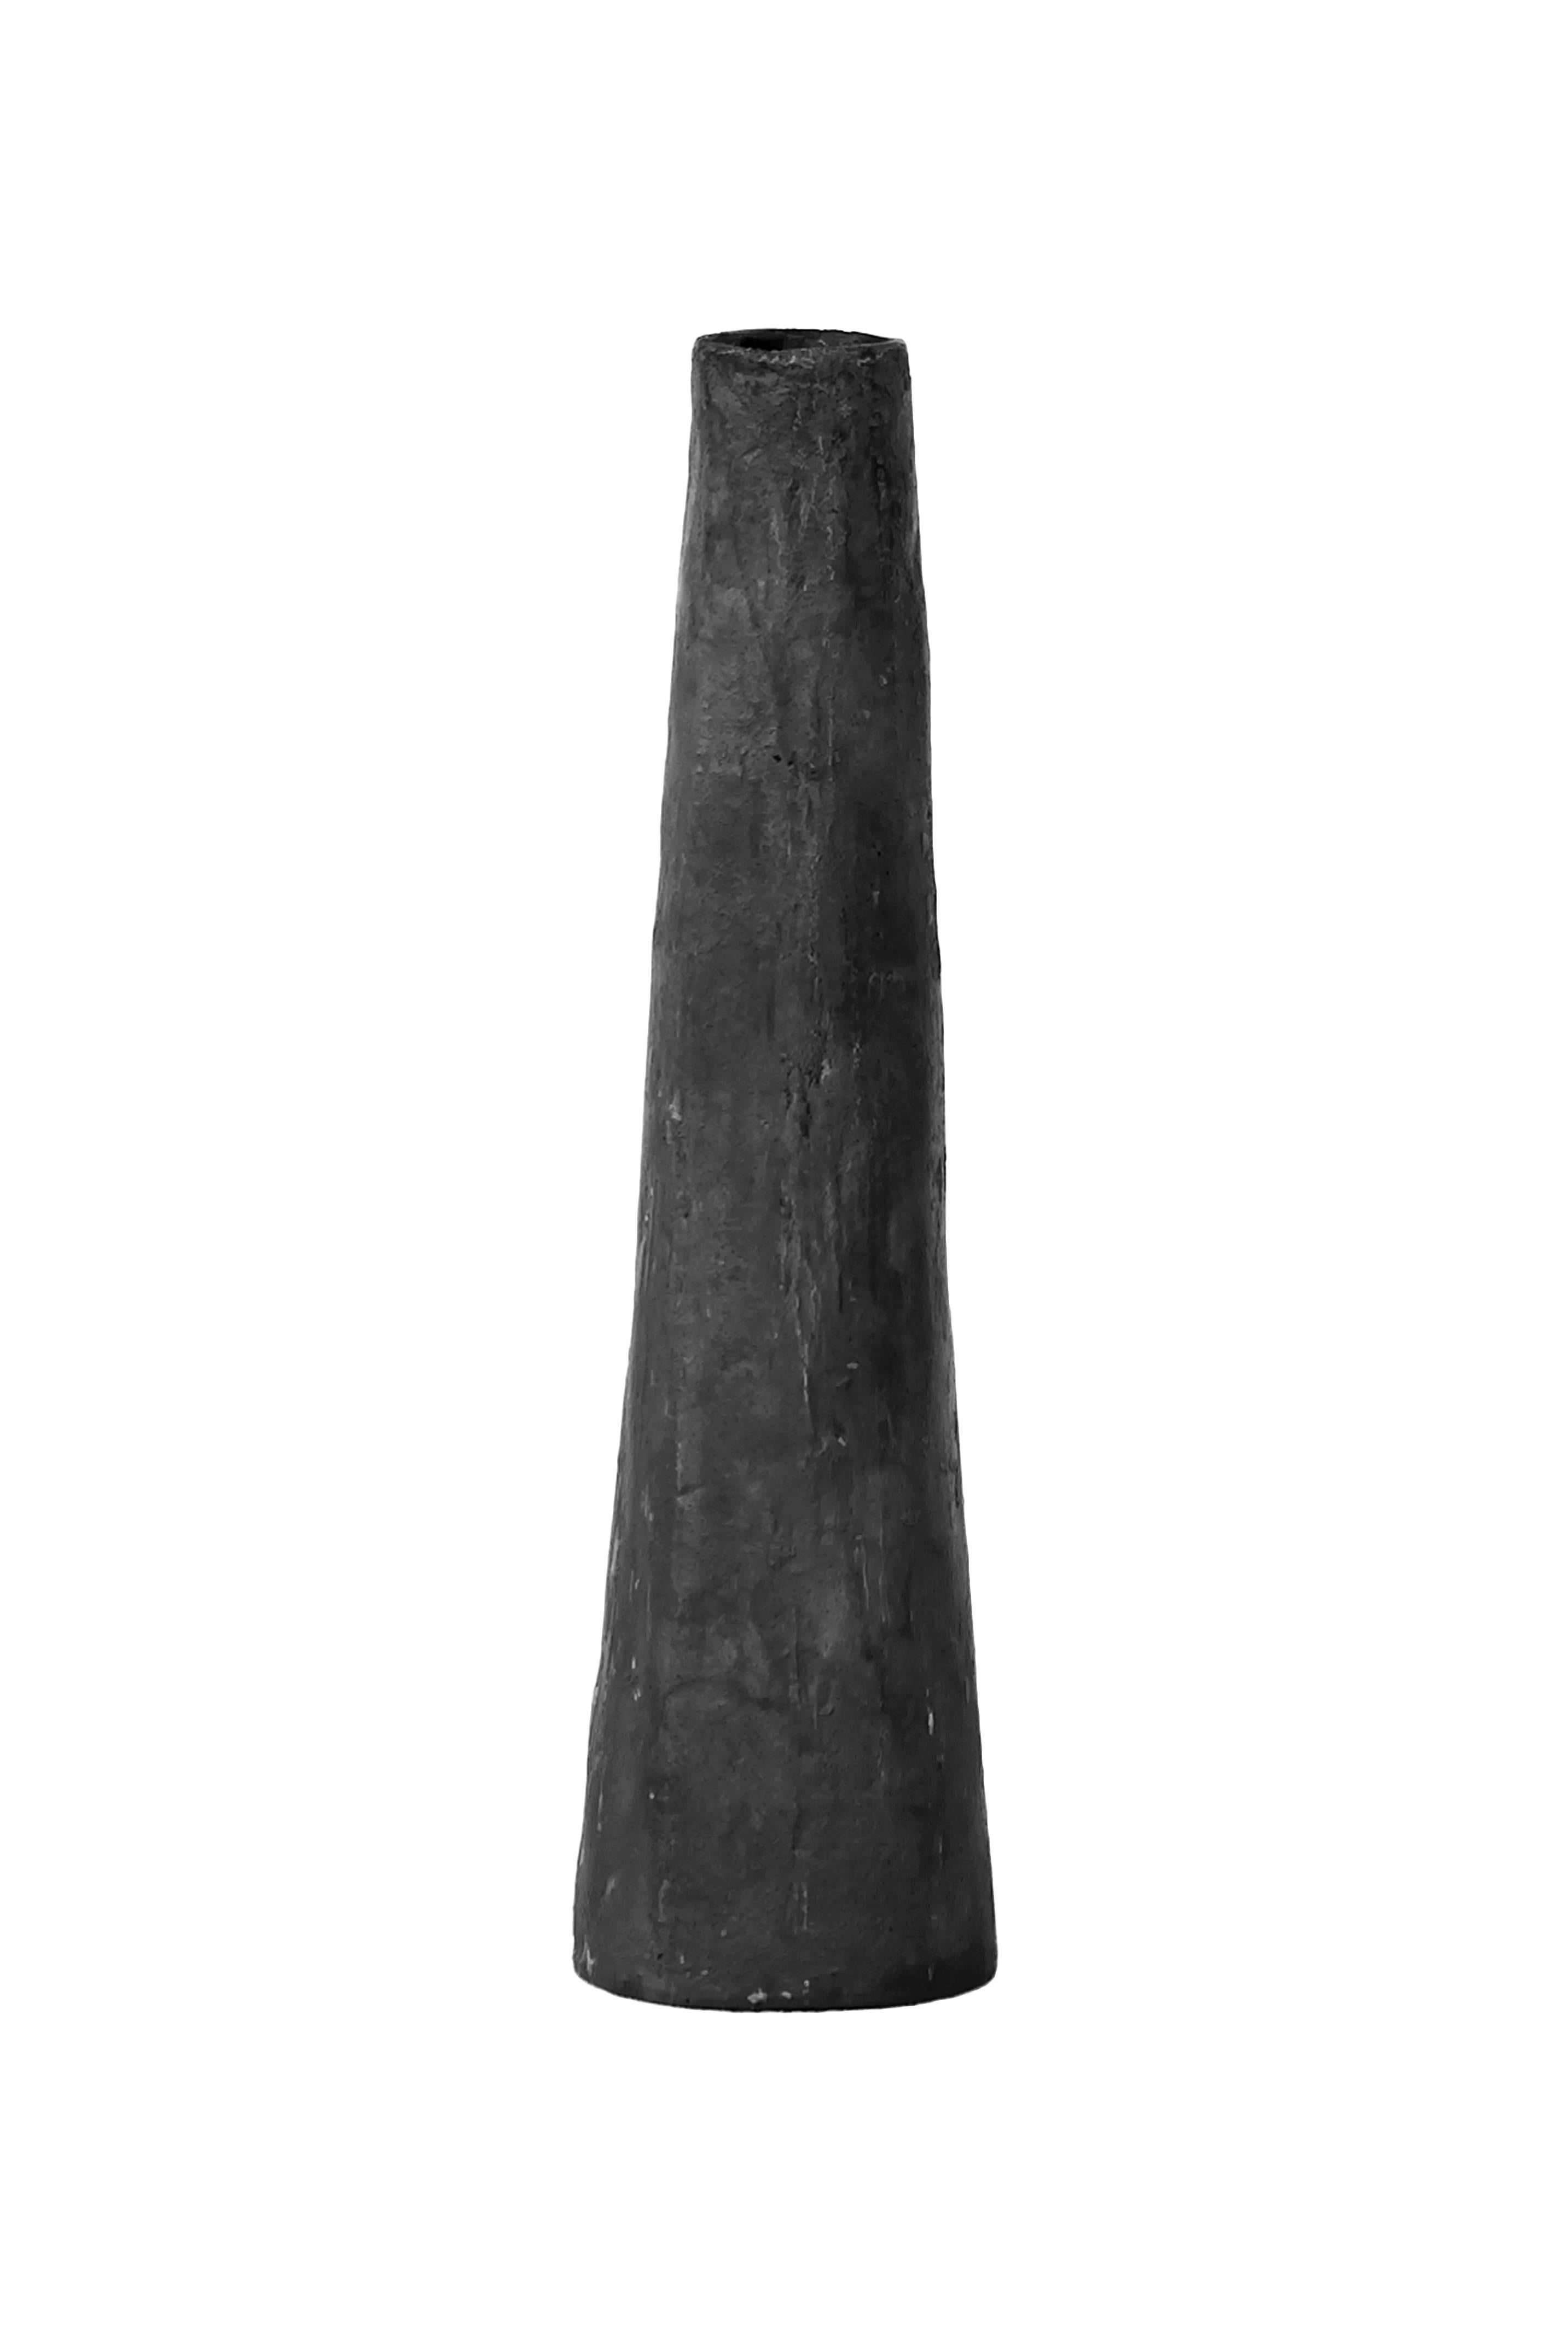 Bronze Candlestick from Rick Owens Home Collection In Excellent Condition For Sale In Chicago, IL